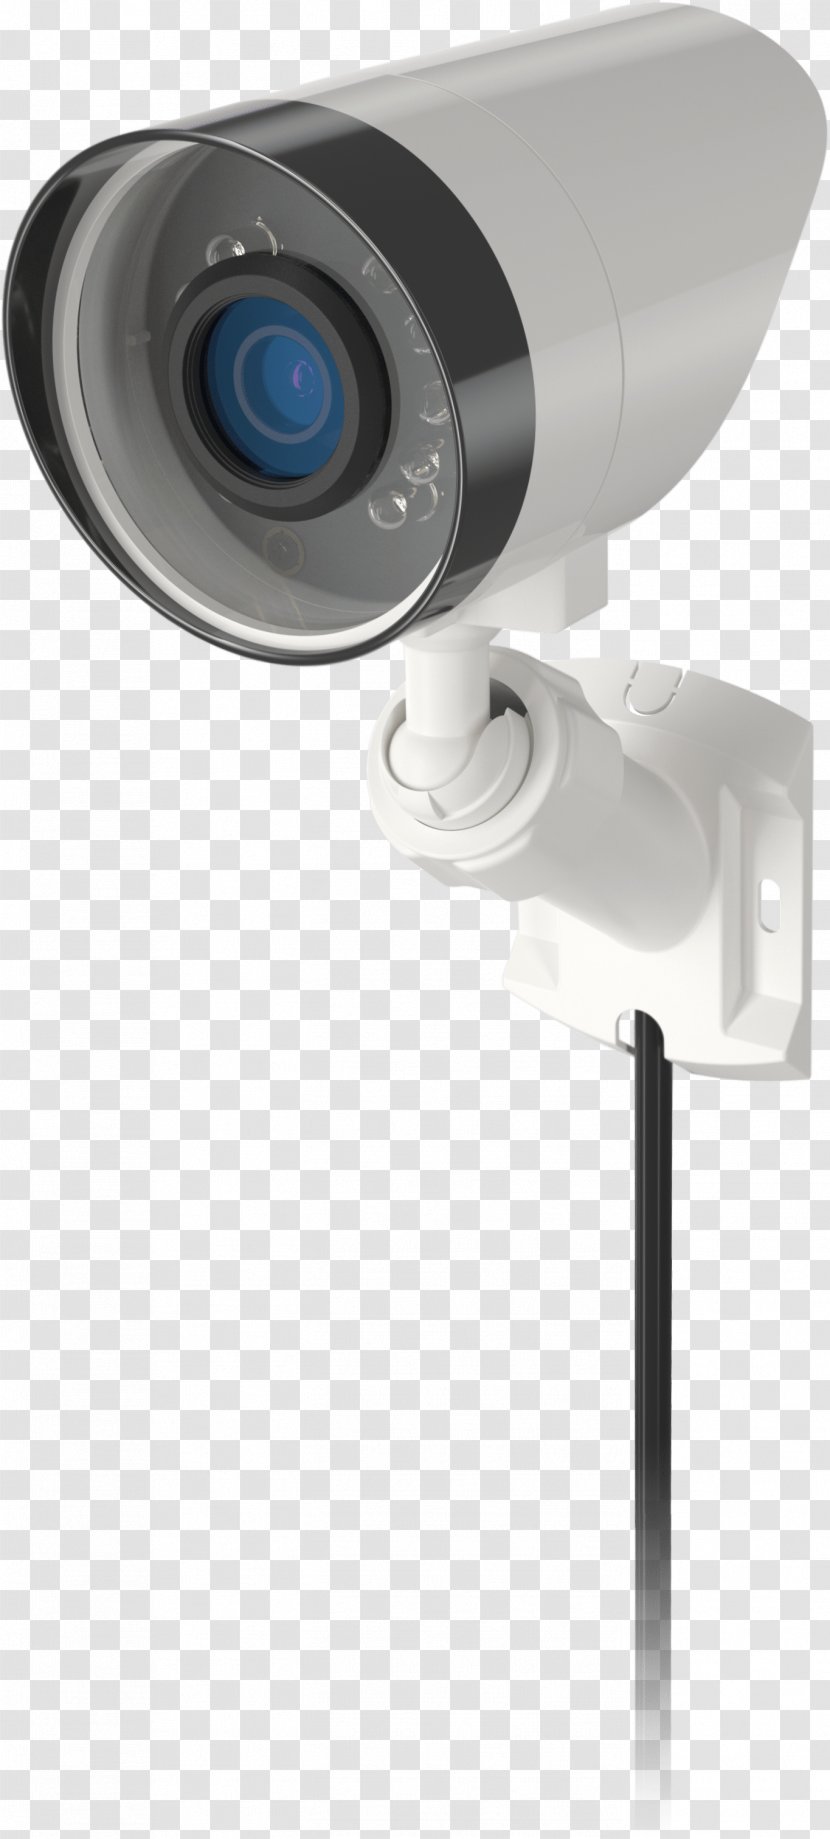 Closed-circuit Television Wi-Fi Wireless Security Camera Surveillance - System - Outdoors Agencies Transparent PNG